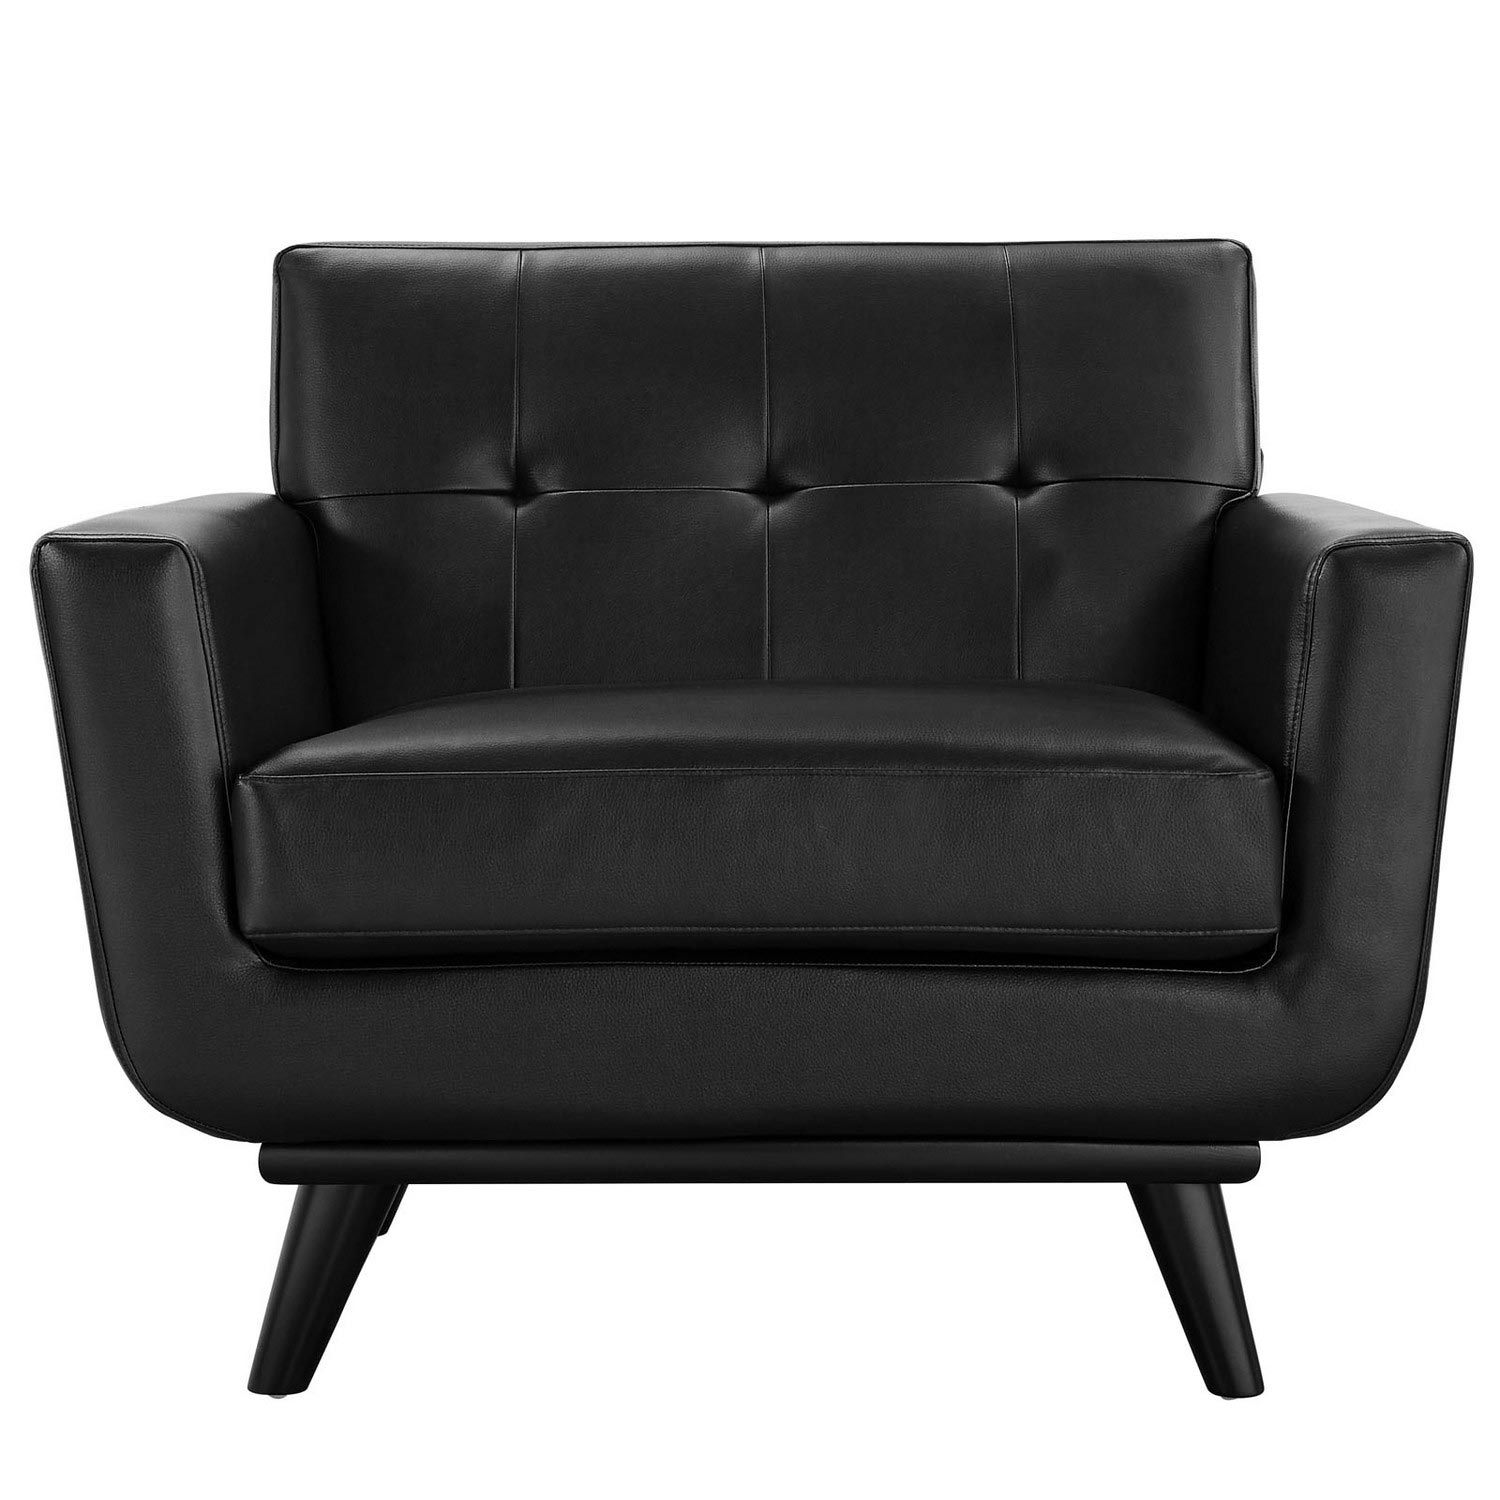 Modway Engage Bonded Leather Armchair - Black